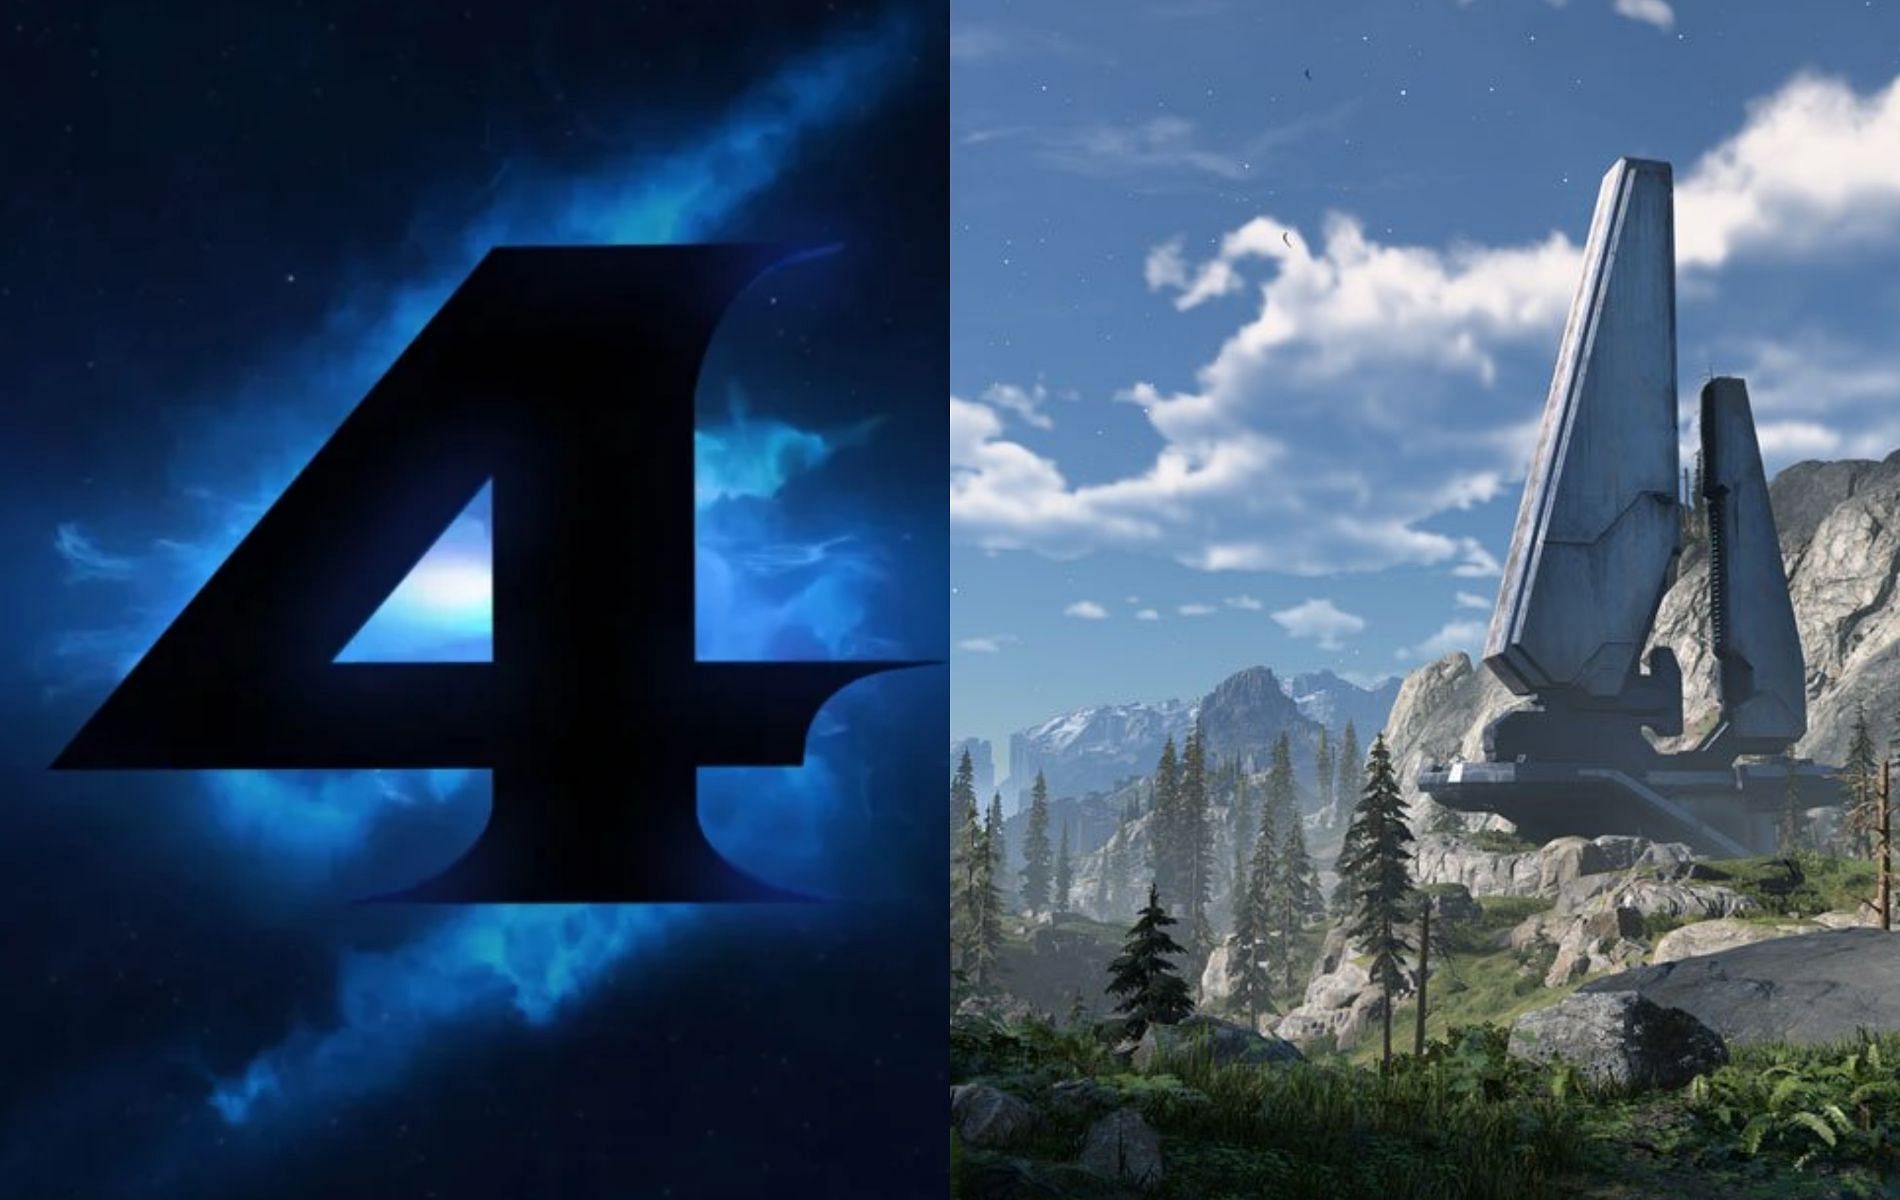 Cover art featuring Metroid Prime 4 reveal teaser and promottional screenshot for Halo Infinite